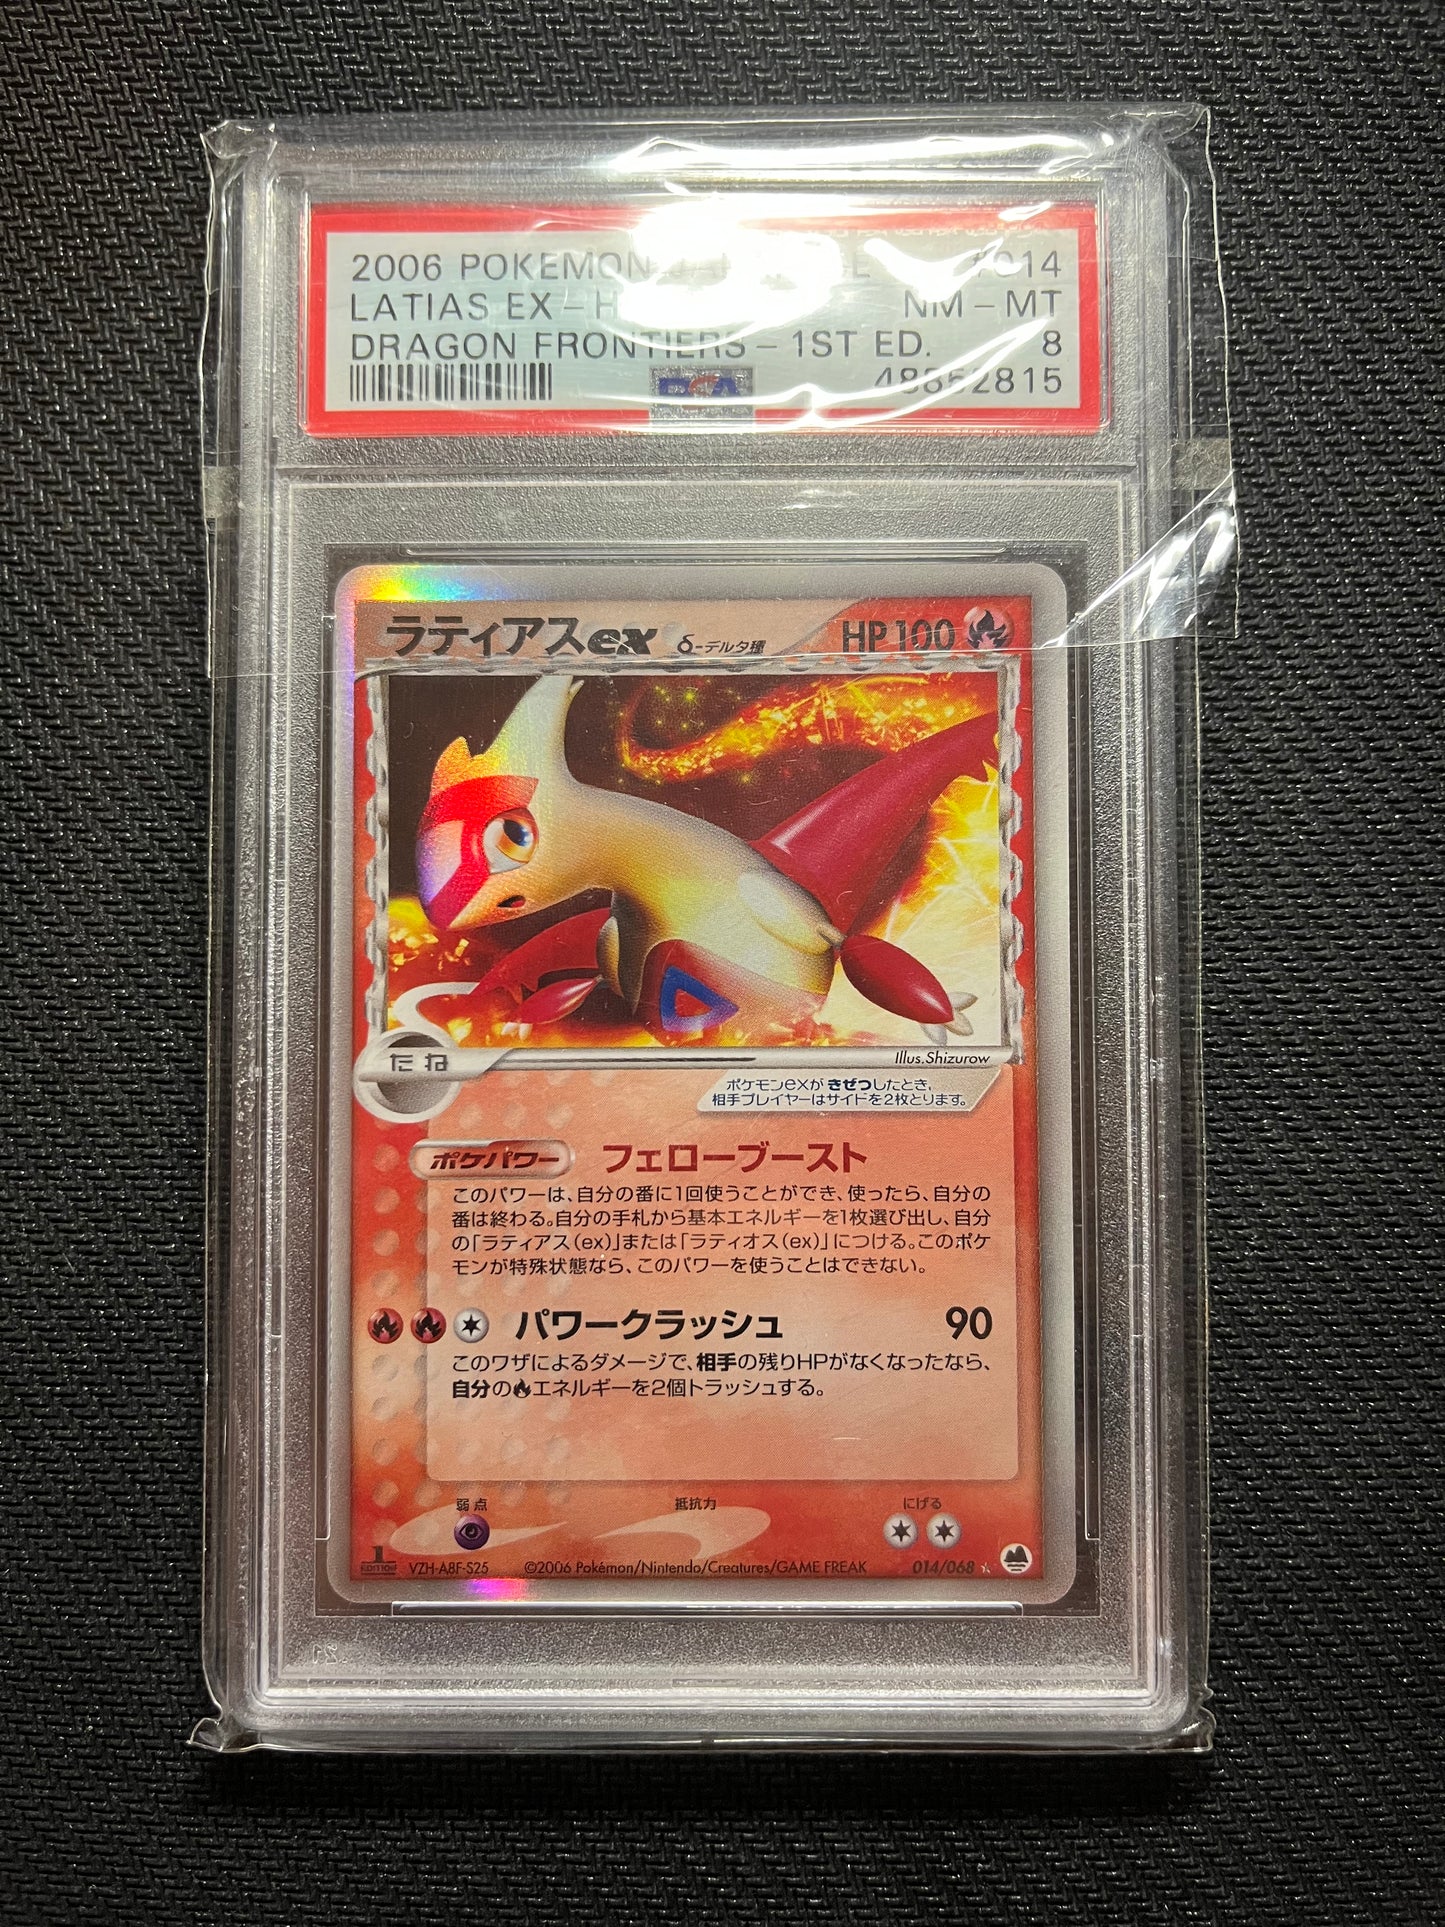 Latias Ex #14 Pokemon Japanese Offense And Defense Of The Furthest Ends (PSA 8)